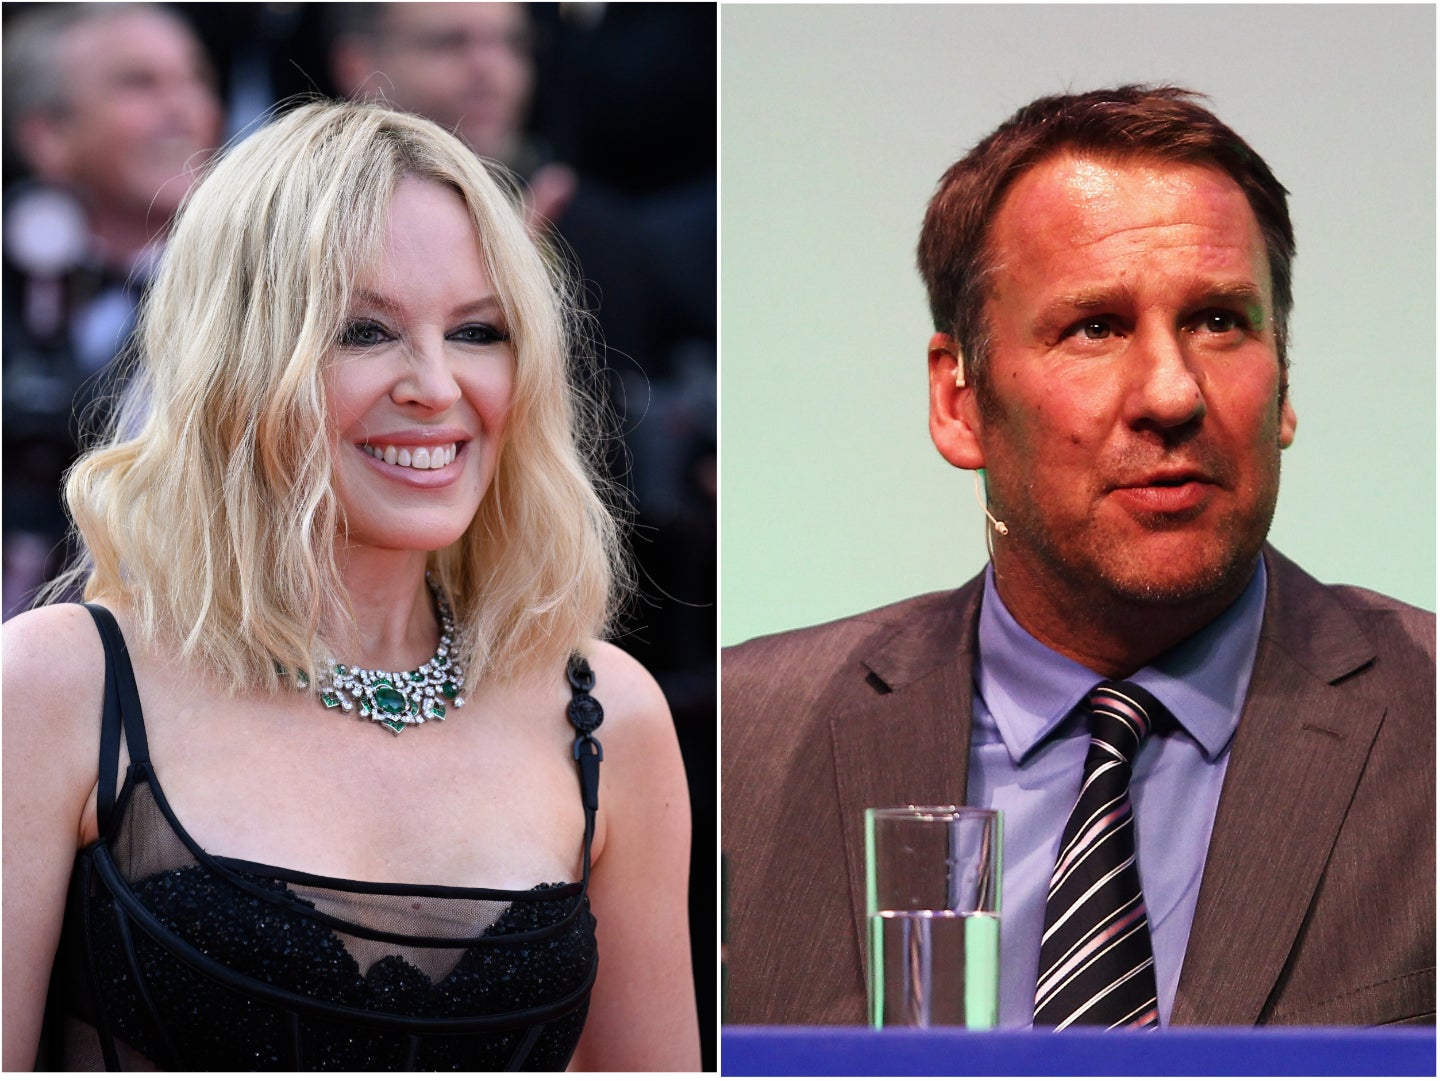 Paul Merson claims he was turned down by Kylie Minogue at the Brit Awards The Independent